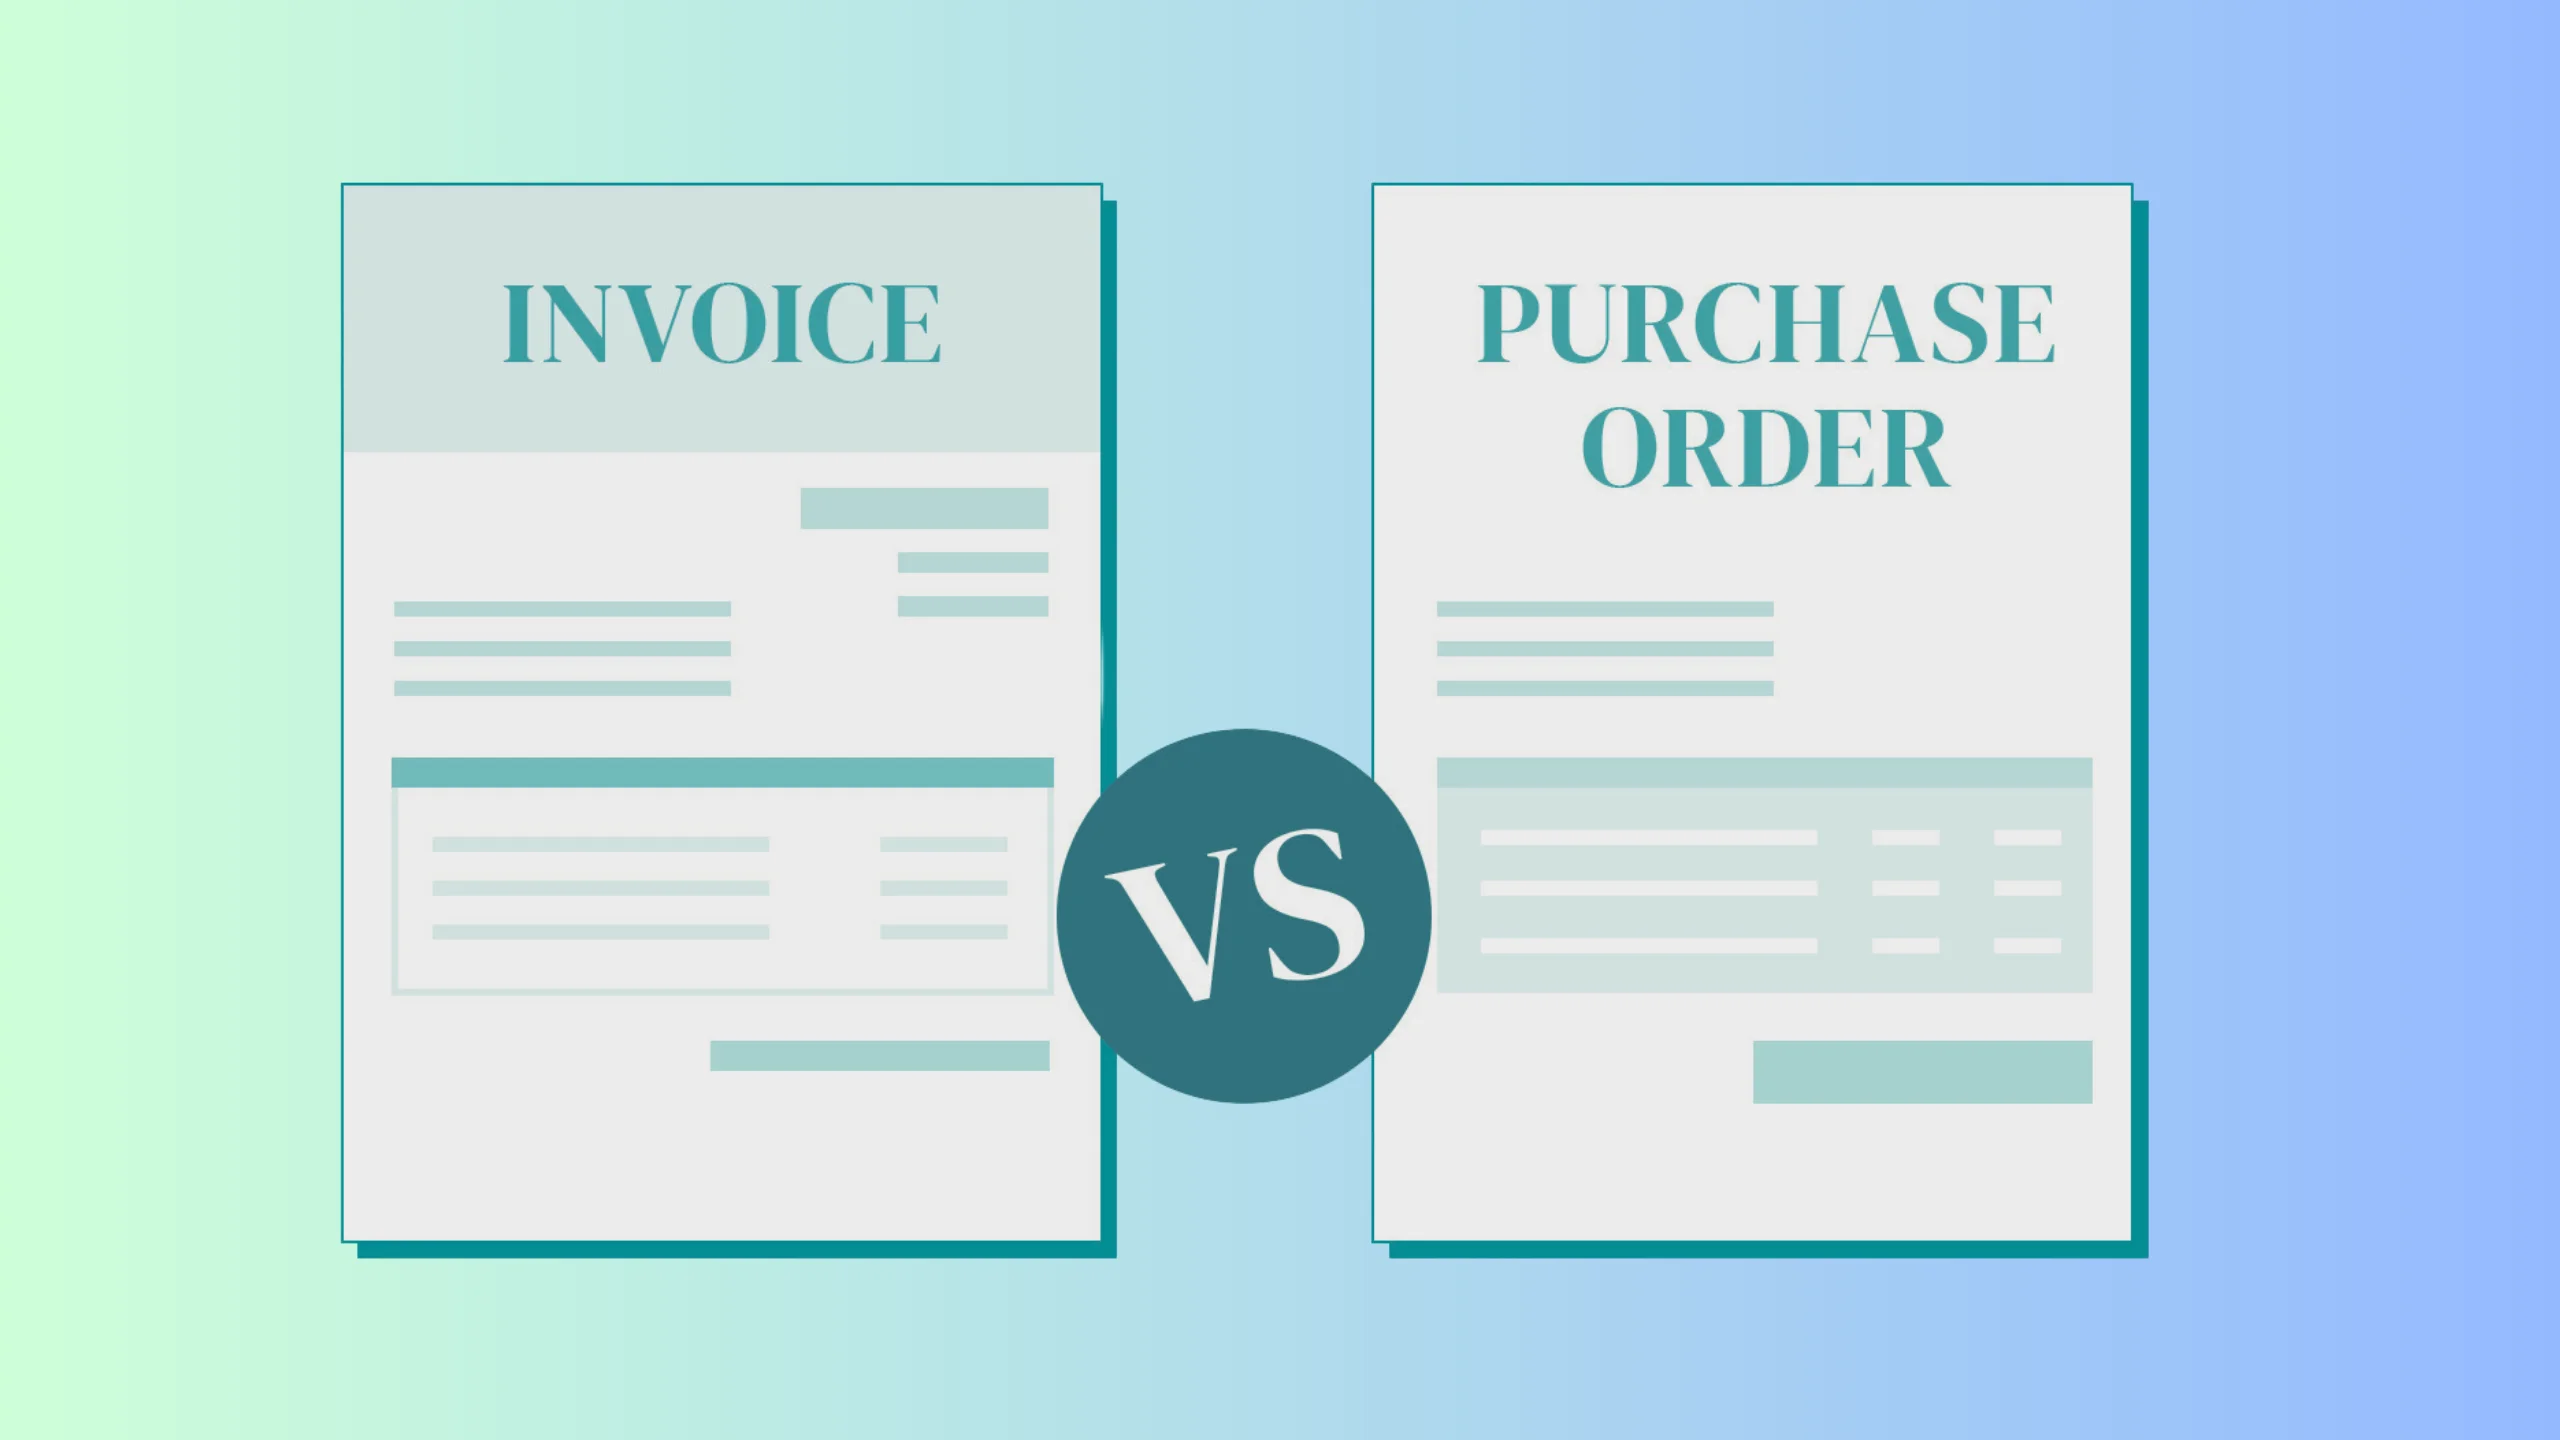 A purchase order (PO) is a document issued by a buyer to a seller, indicating the types, quantities, and agreed prices for products or services that the seller will provide to the buyer.